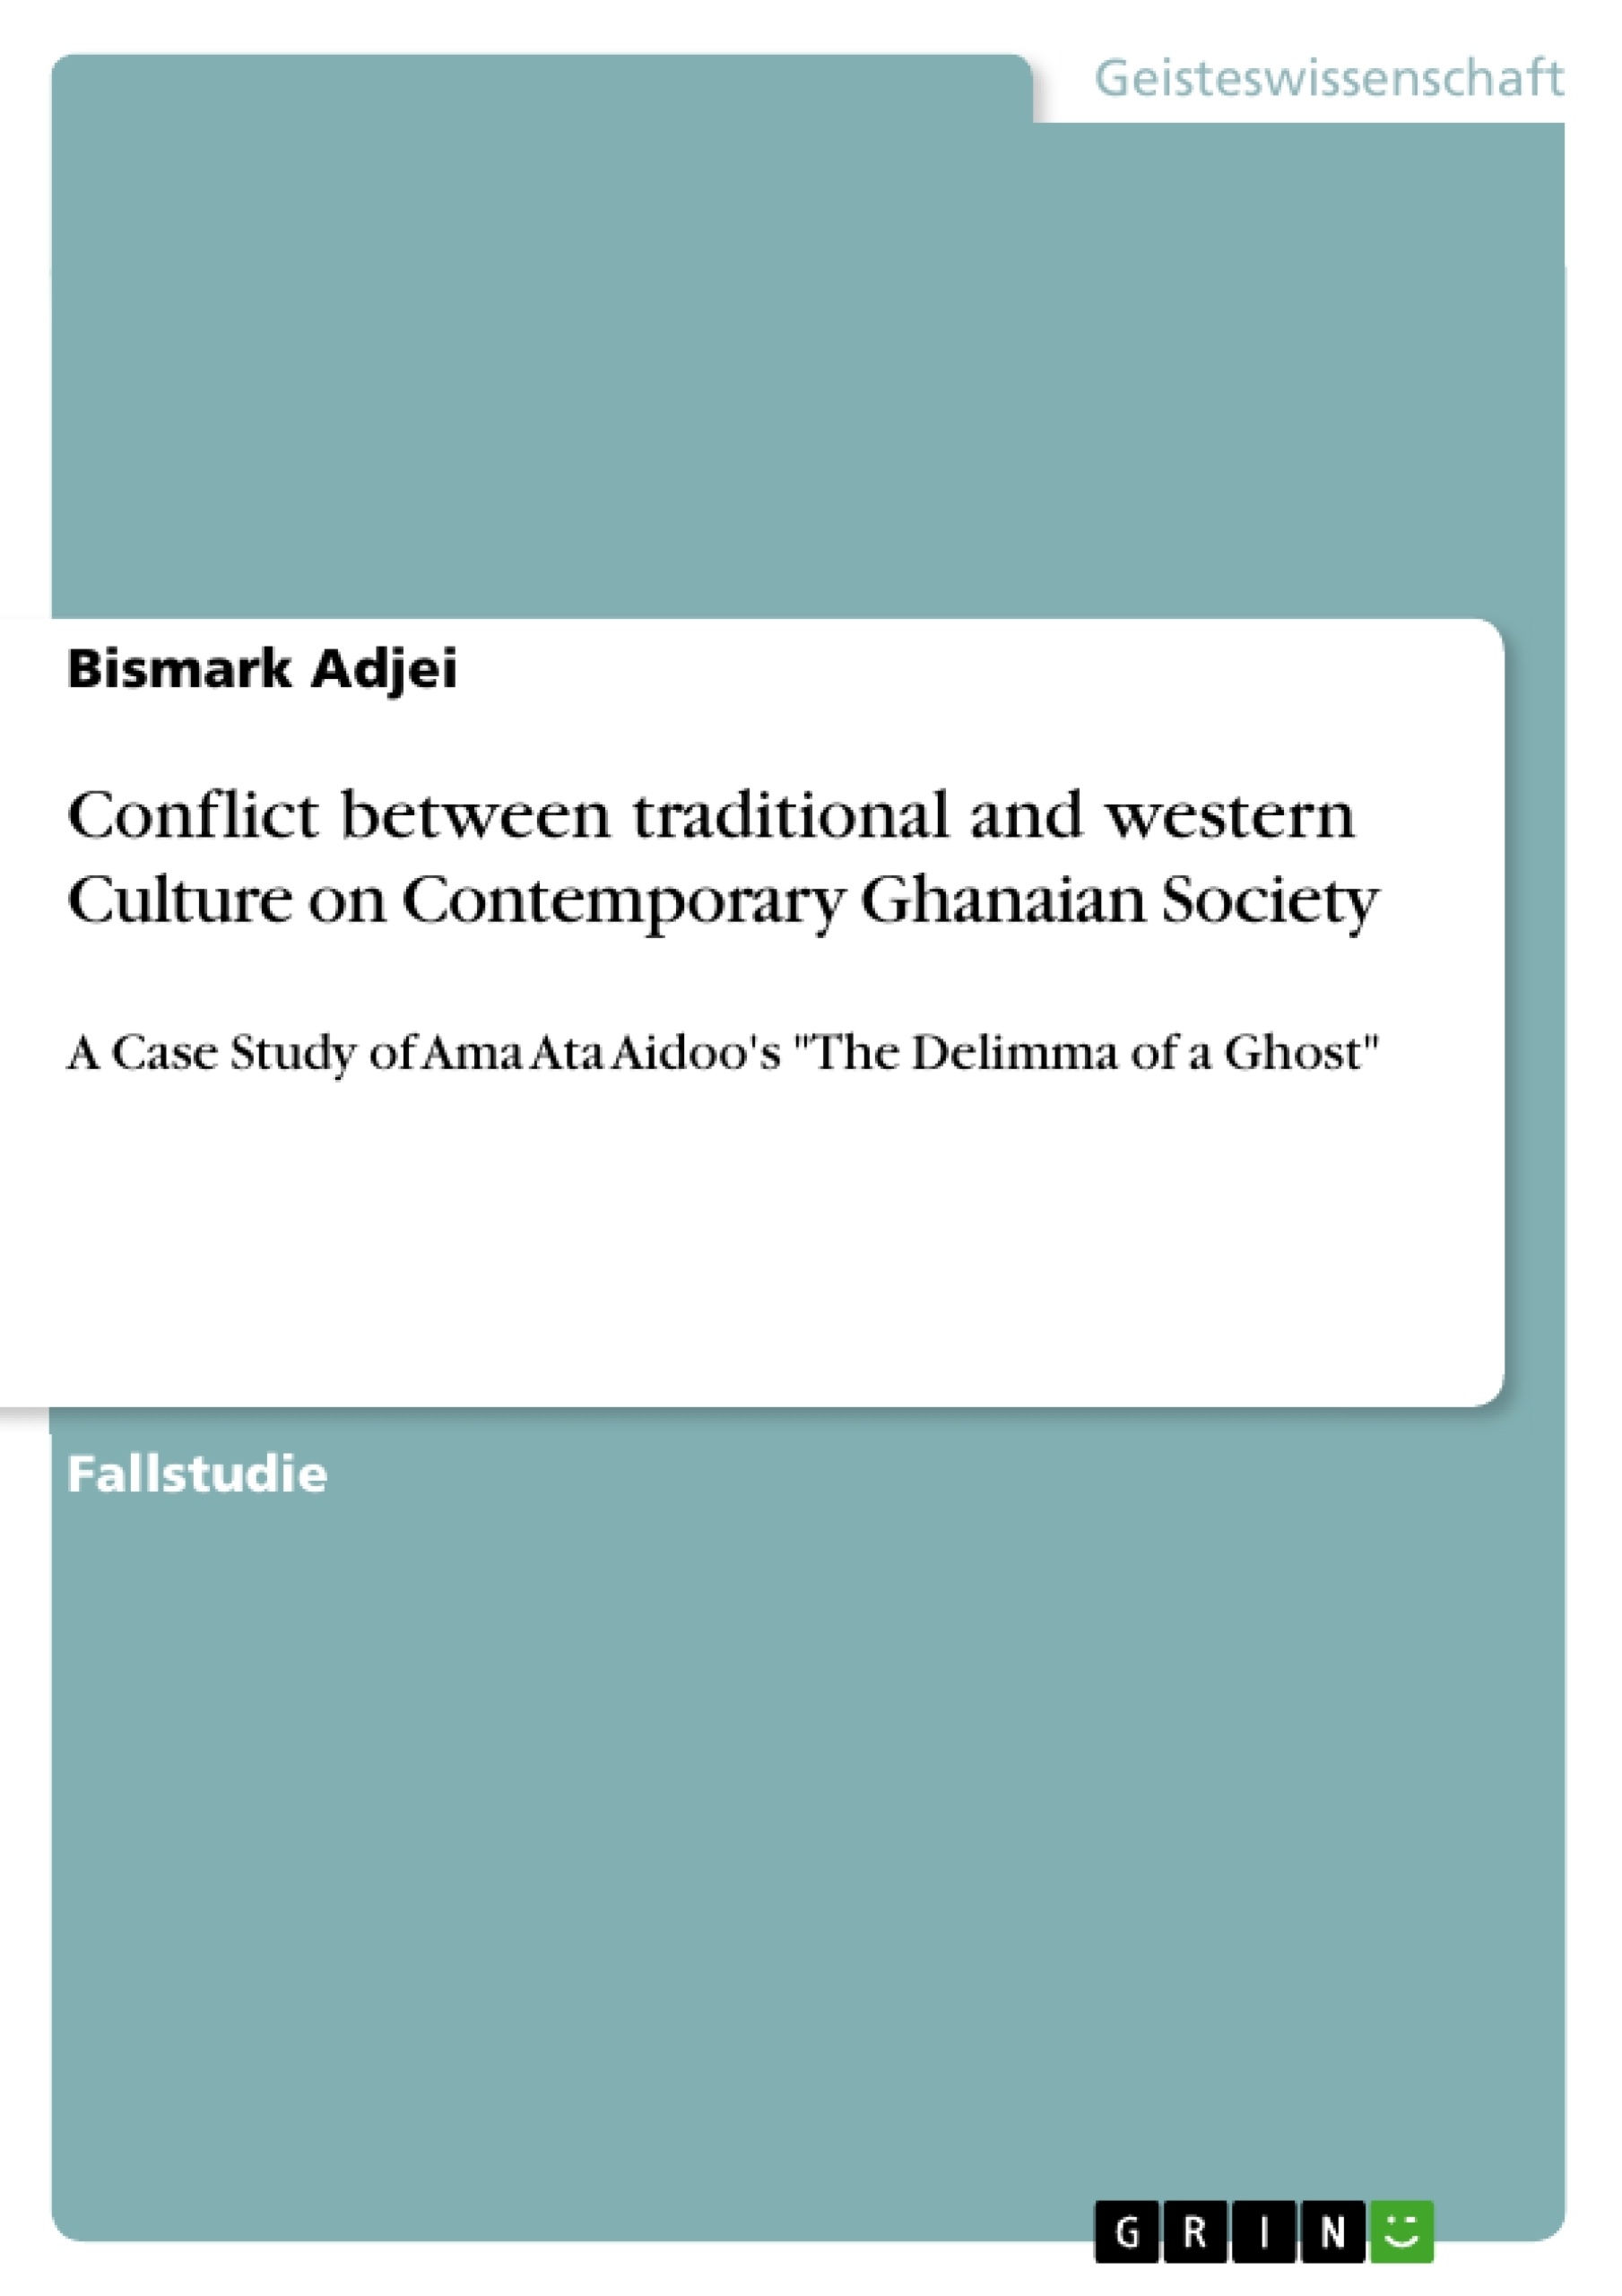 Titel: Conflict between traditional and western Culture on Contemporary Ghanaian Society